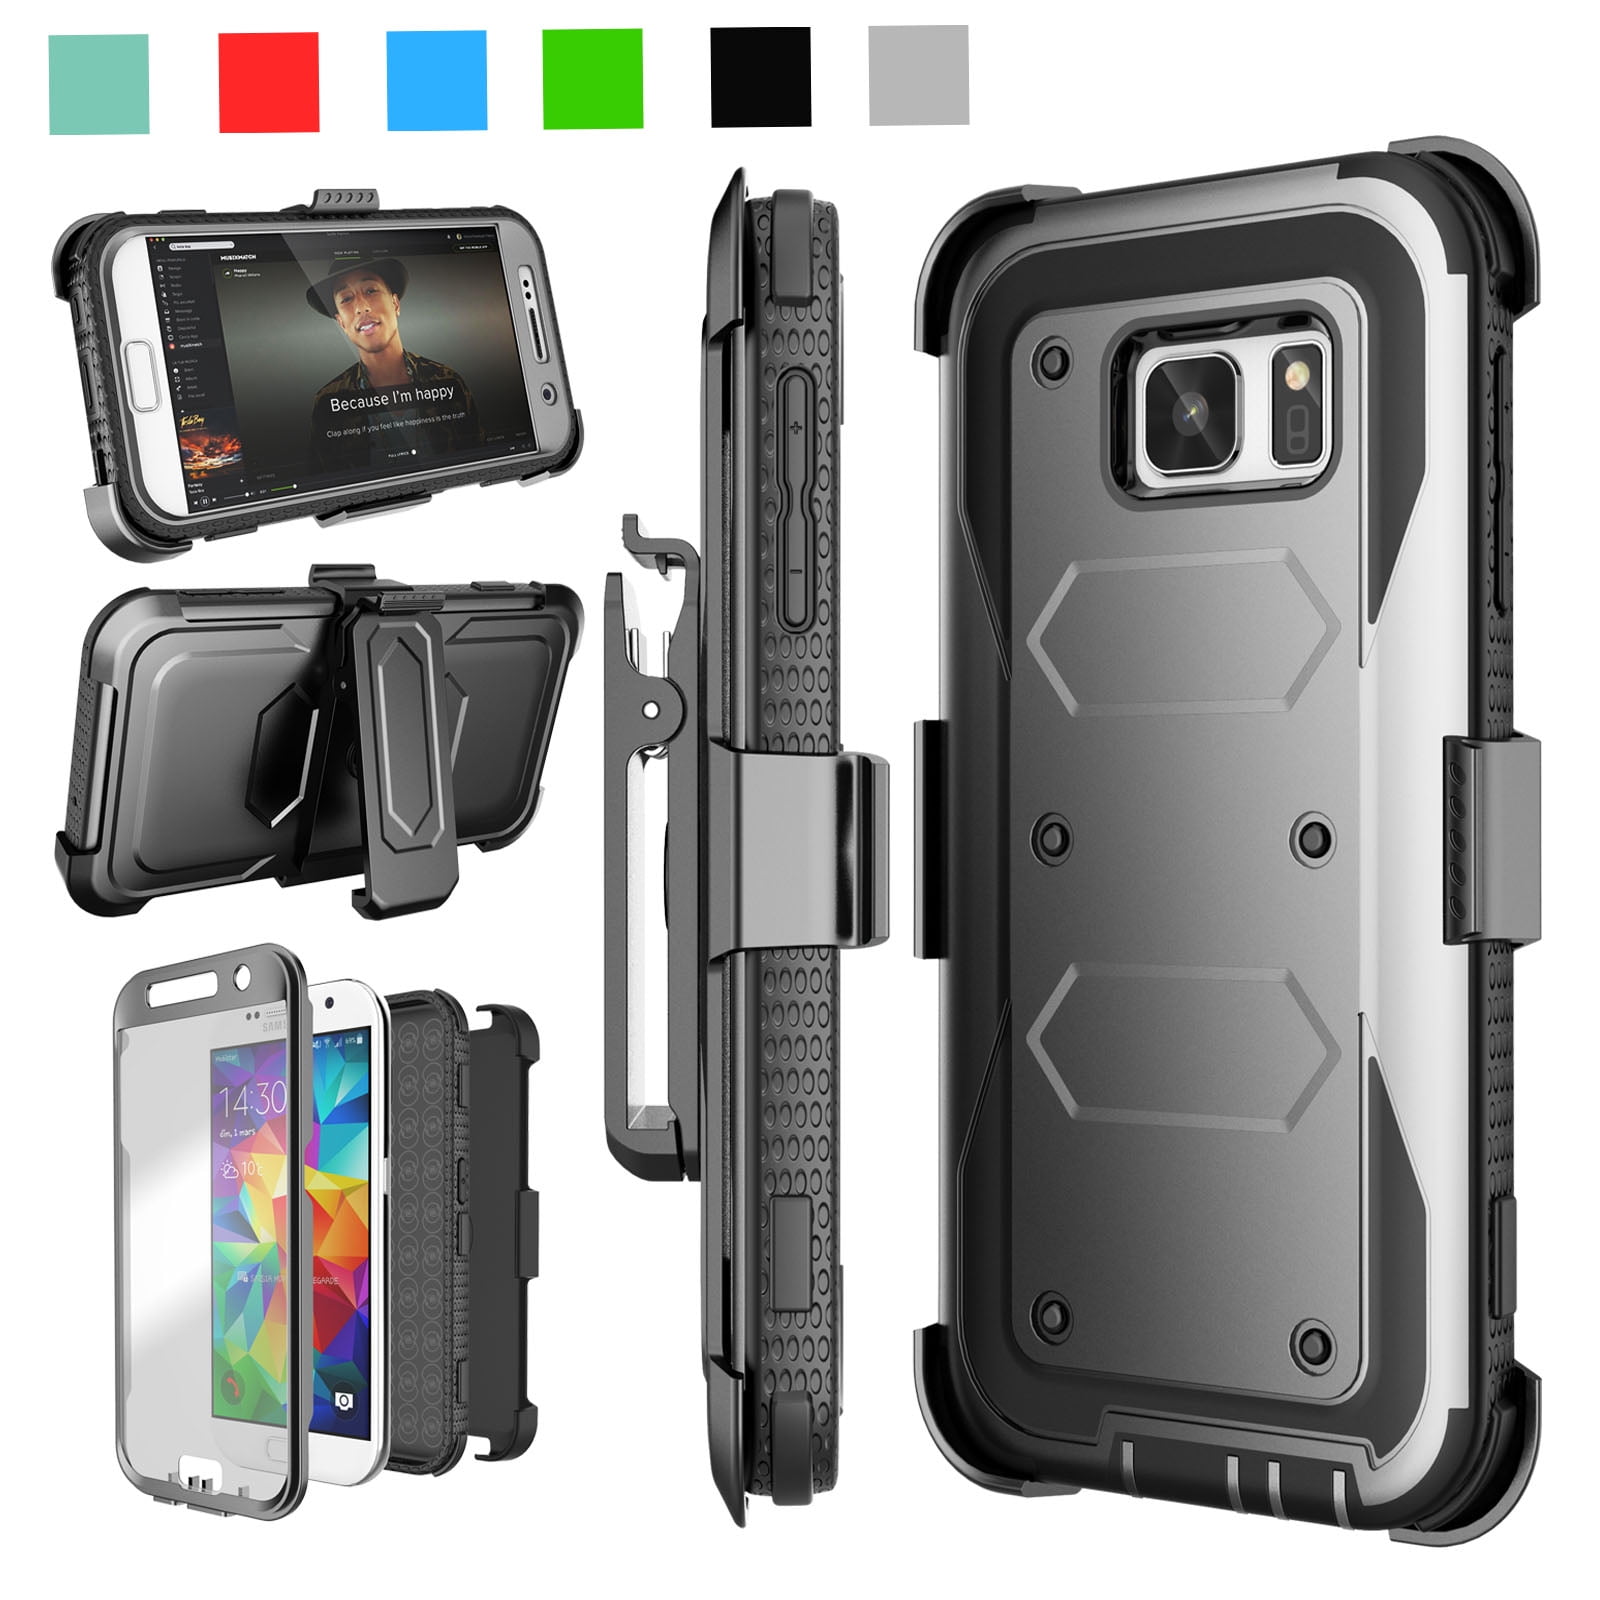 AICase Heavy Duty Tough 4 in 1 Rugged Shockproof Cover with Belt Clip Armor Protective Cover for Samsung Galaxy S7 Galaxy S7 Case 2016 Full Body Purple 